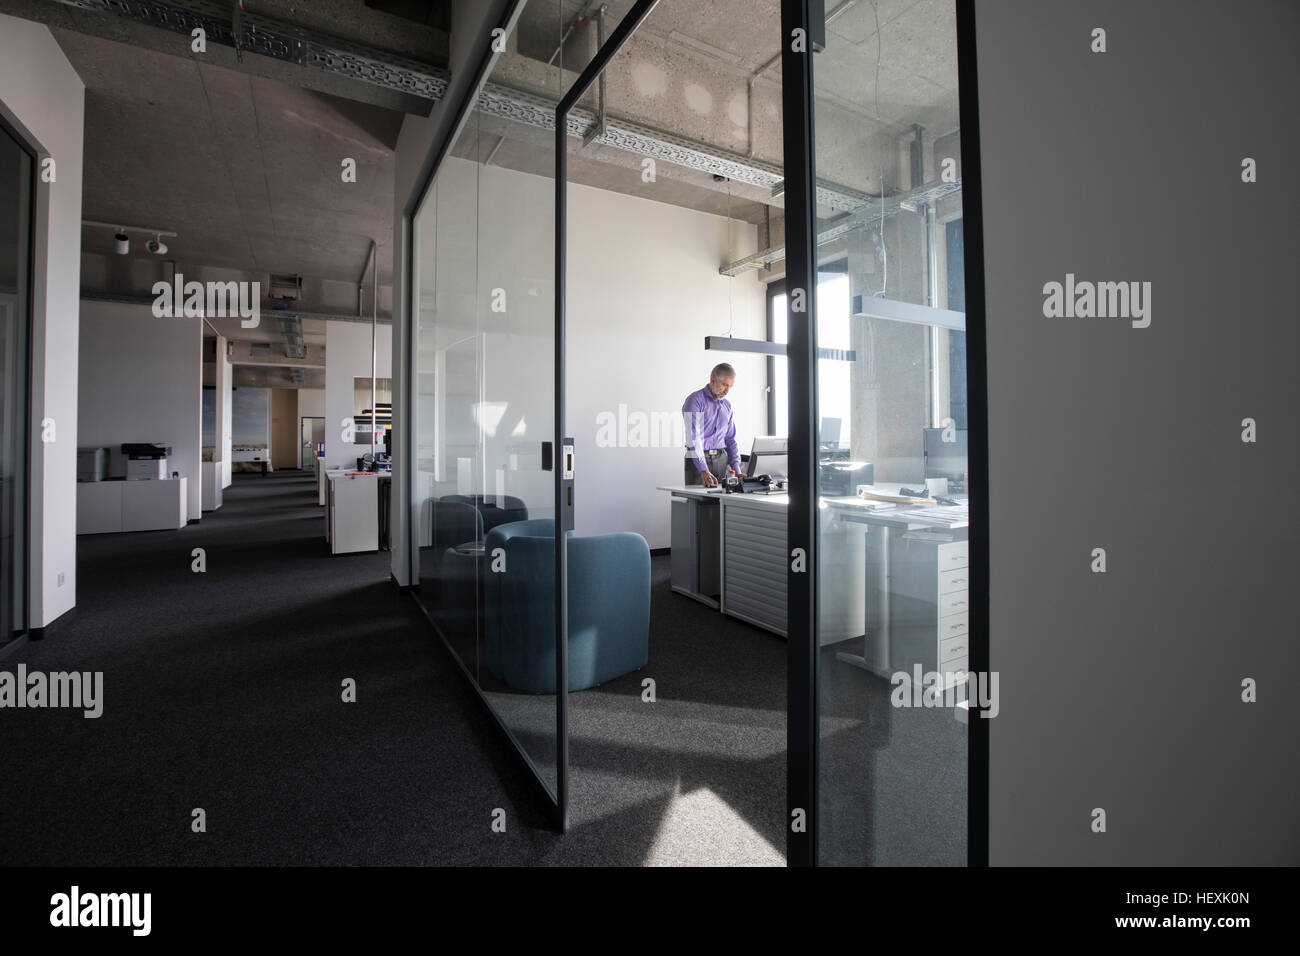 Businessman working alone in office Banque D'Images